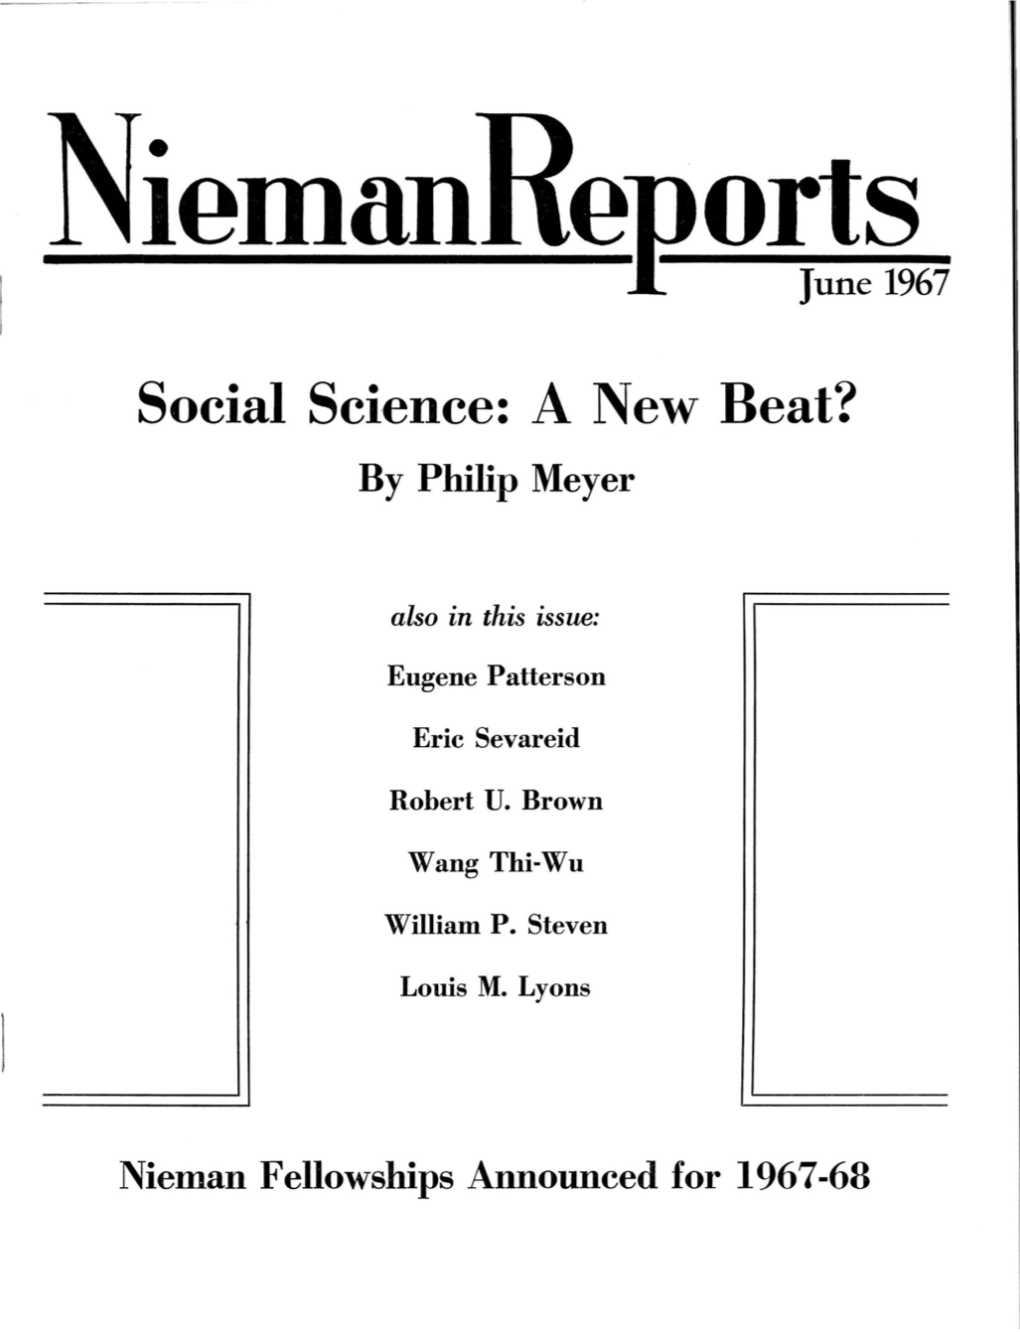 Social Science: a New Beat? by Philip Meyer